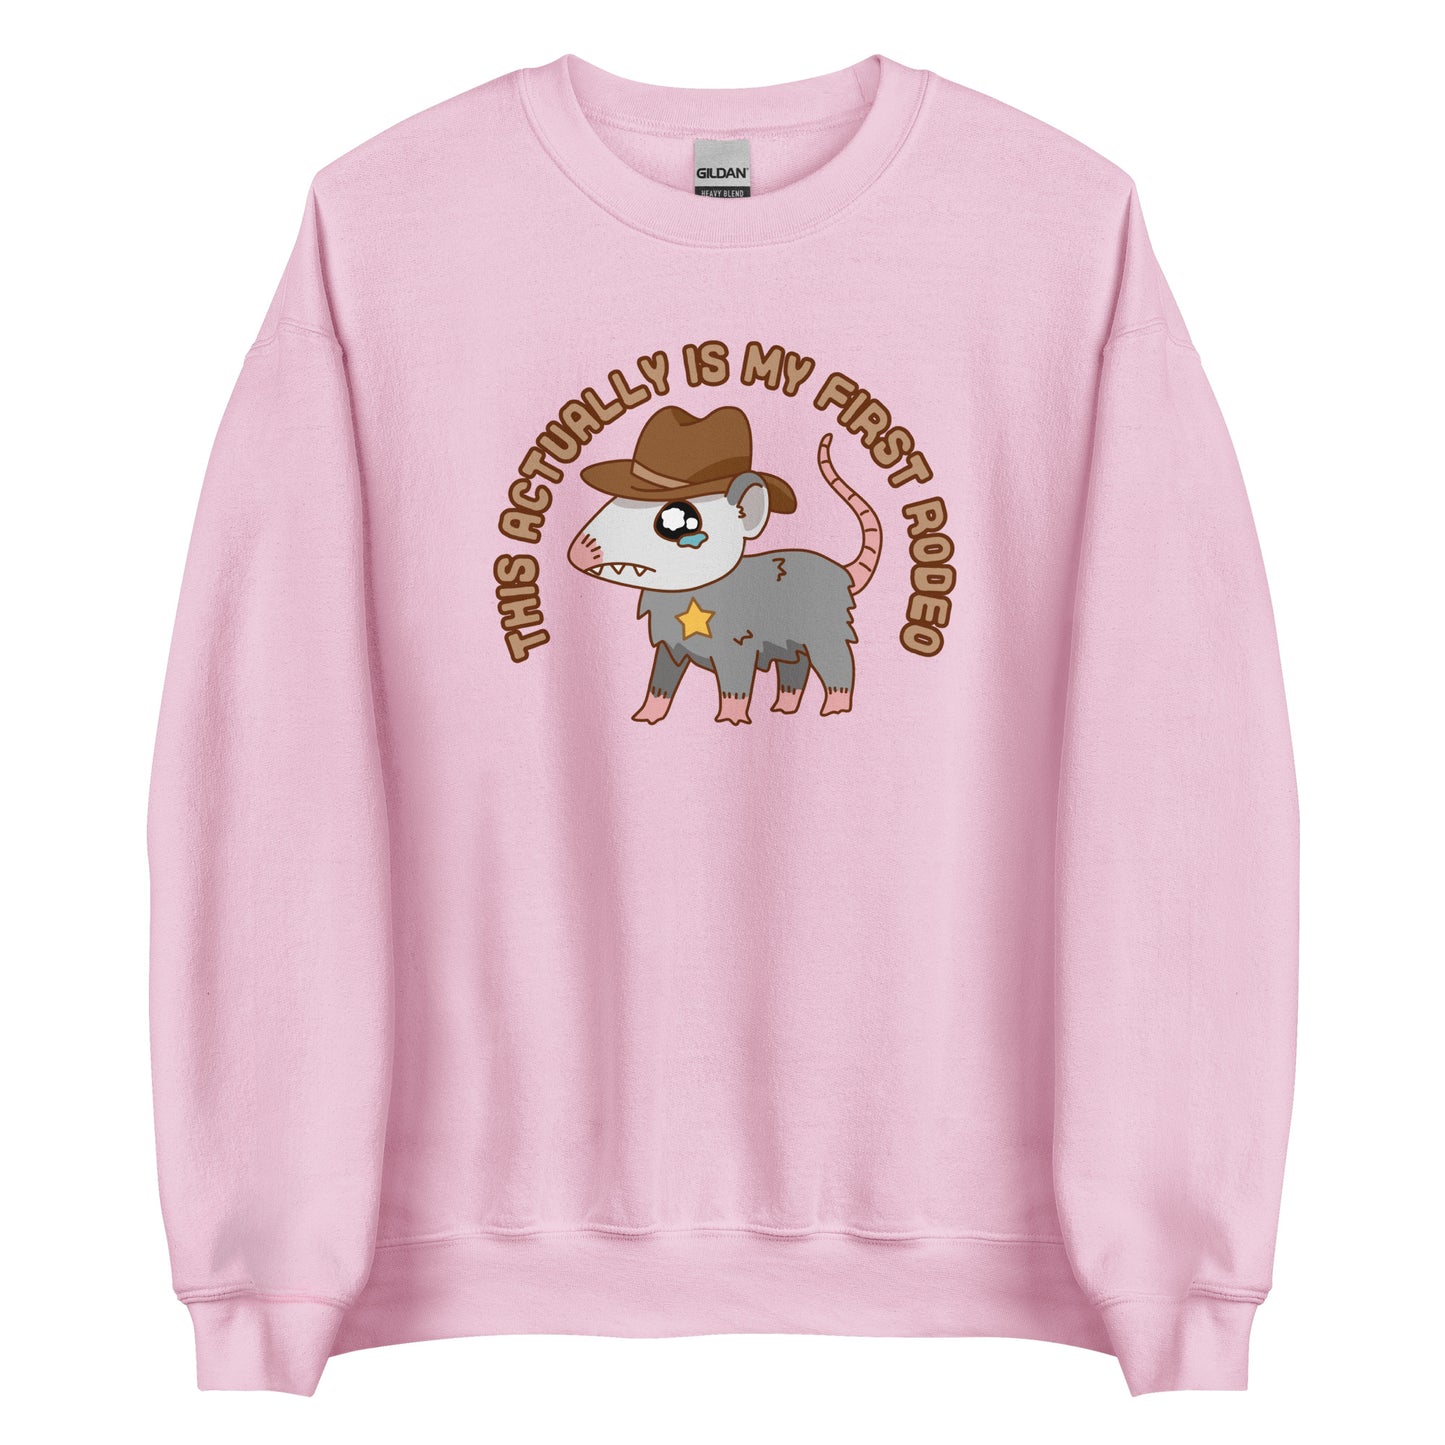 A pink crewneck sweatshirt featuring an illustration of a cute and nervous possum wearing a cowboy hat and sherrif's star badge. Text above the possum in an arc reads "this actually is my first rodeo".